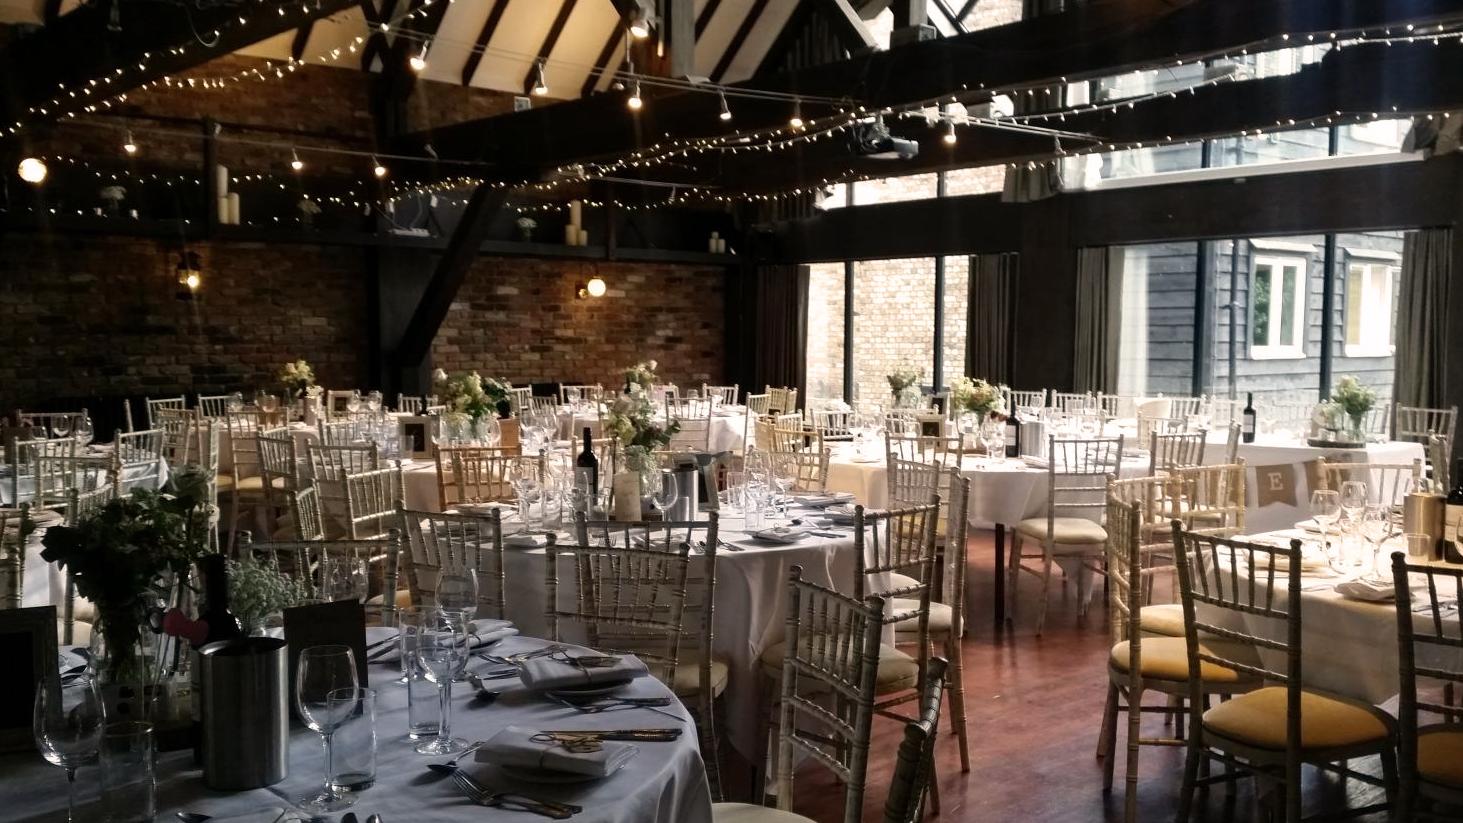 Wedding Venues for Hire in East London